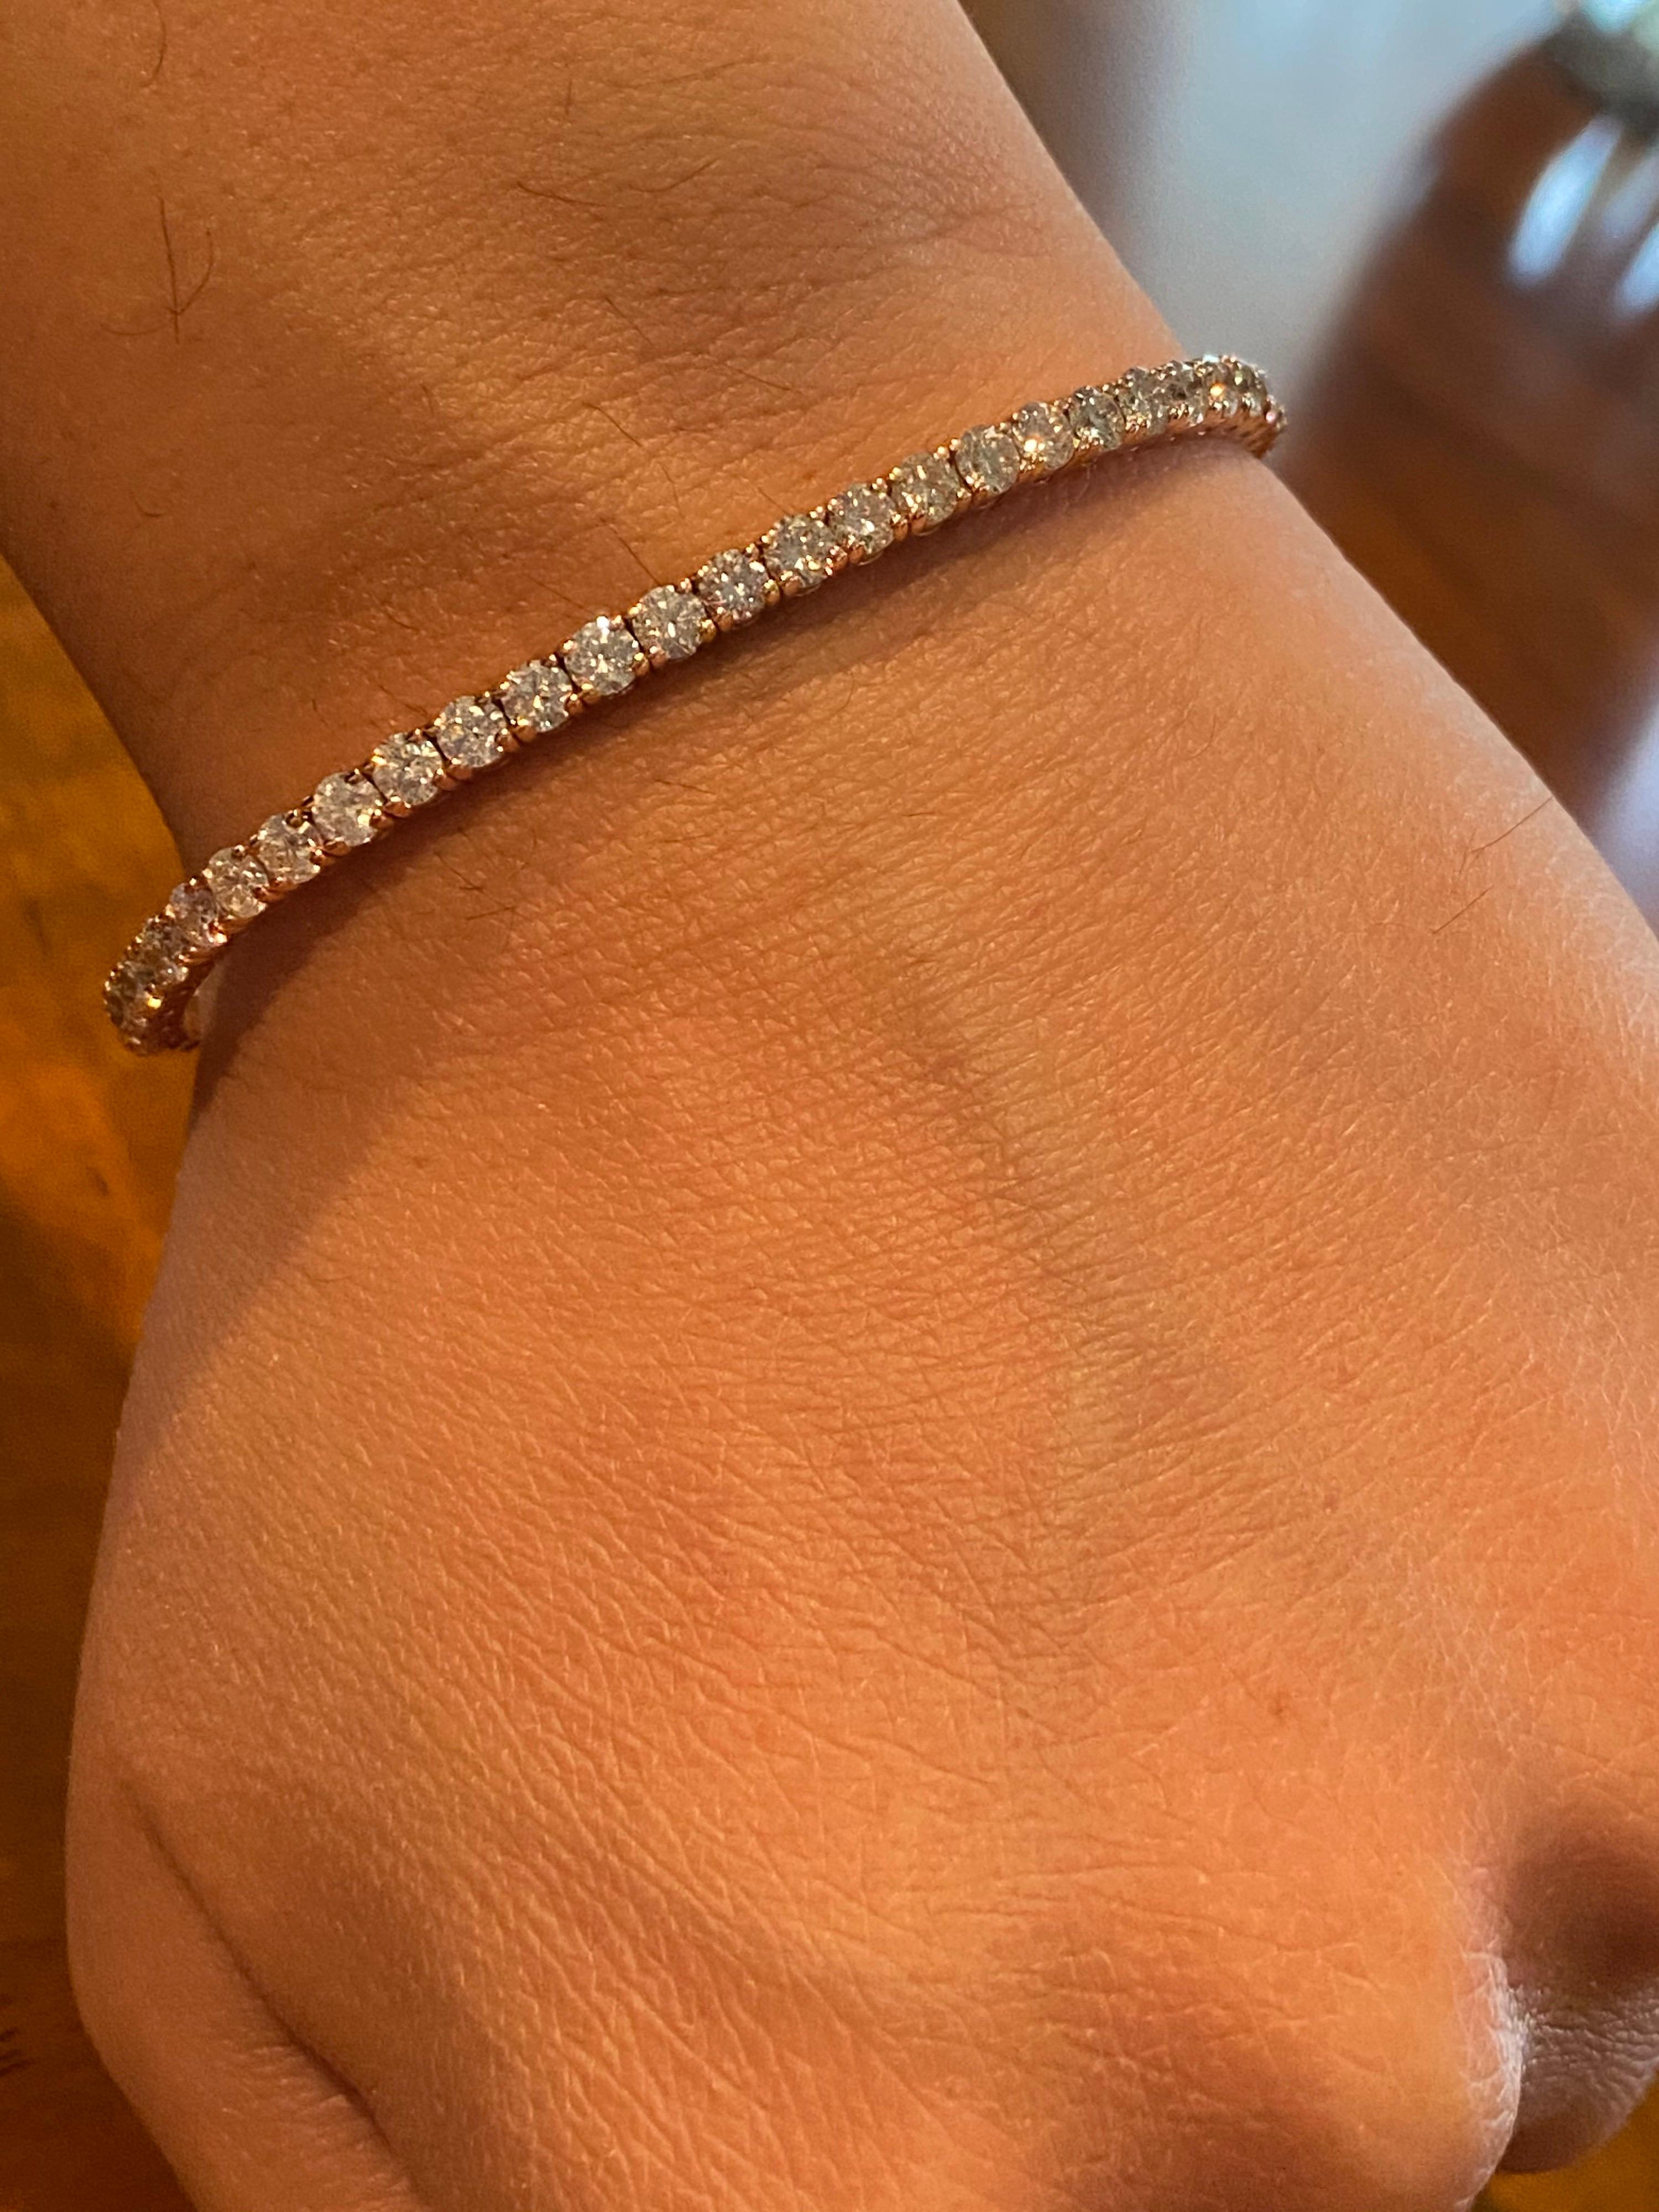 Flexible diamond bangle set in 14K rose gold. This Italian made bangle is set halfway of stones each weighing approximately 0.10 carats each. The diamonds are G color, SI1-SI2 clarity and the total weight is 3 carats. This bangle is available in